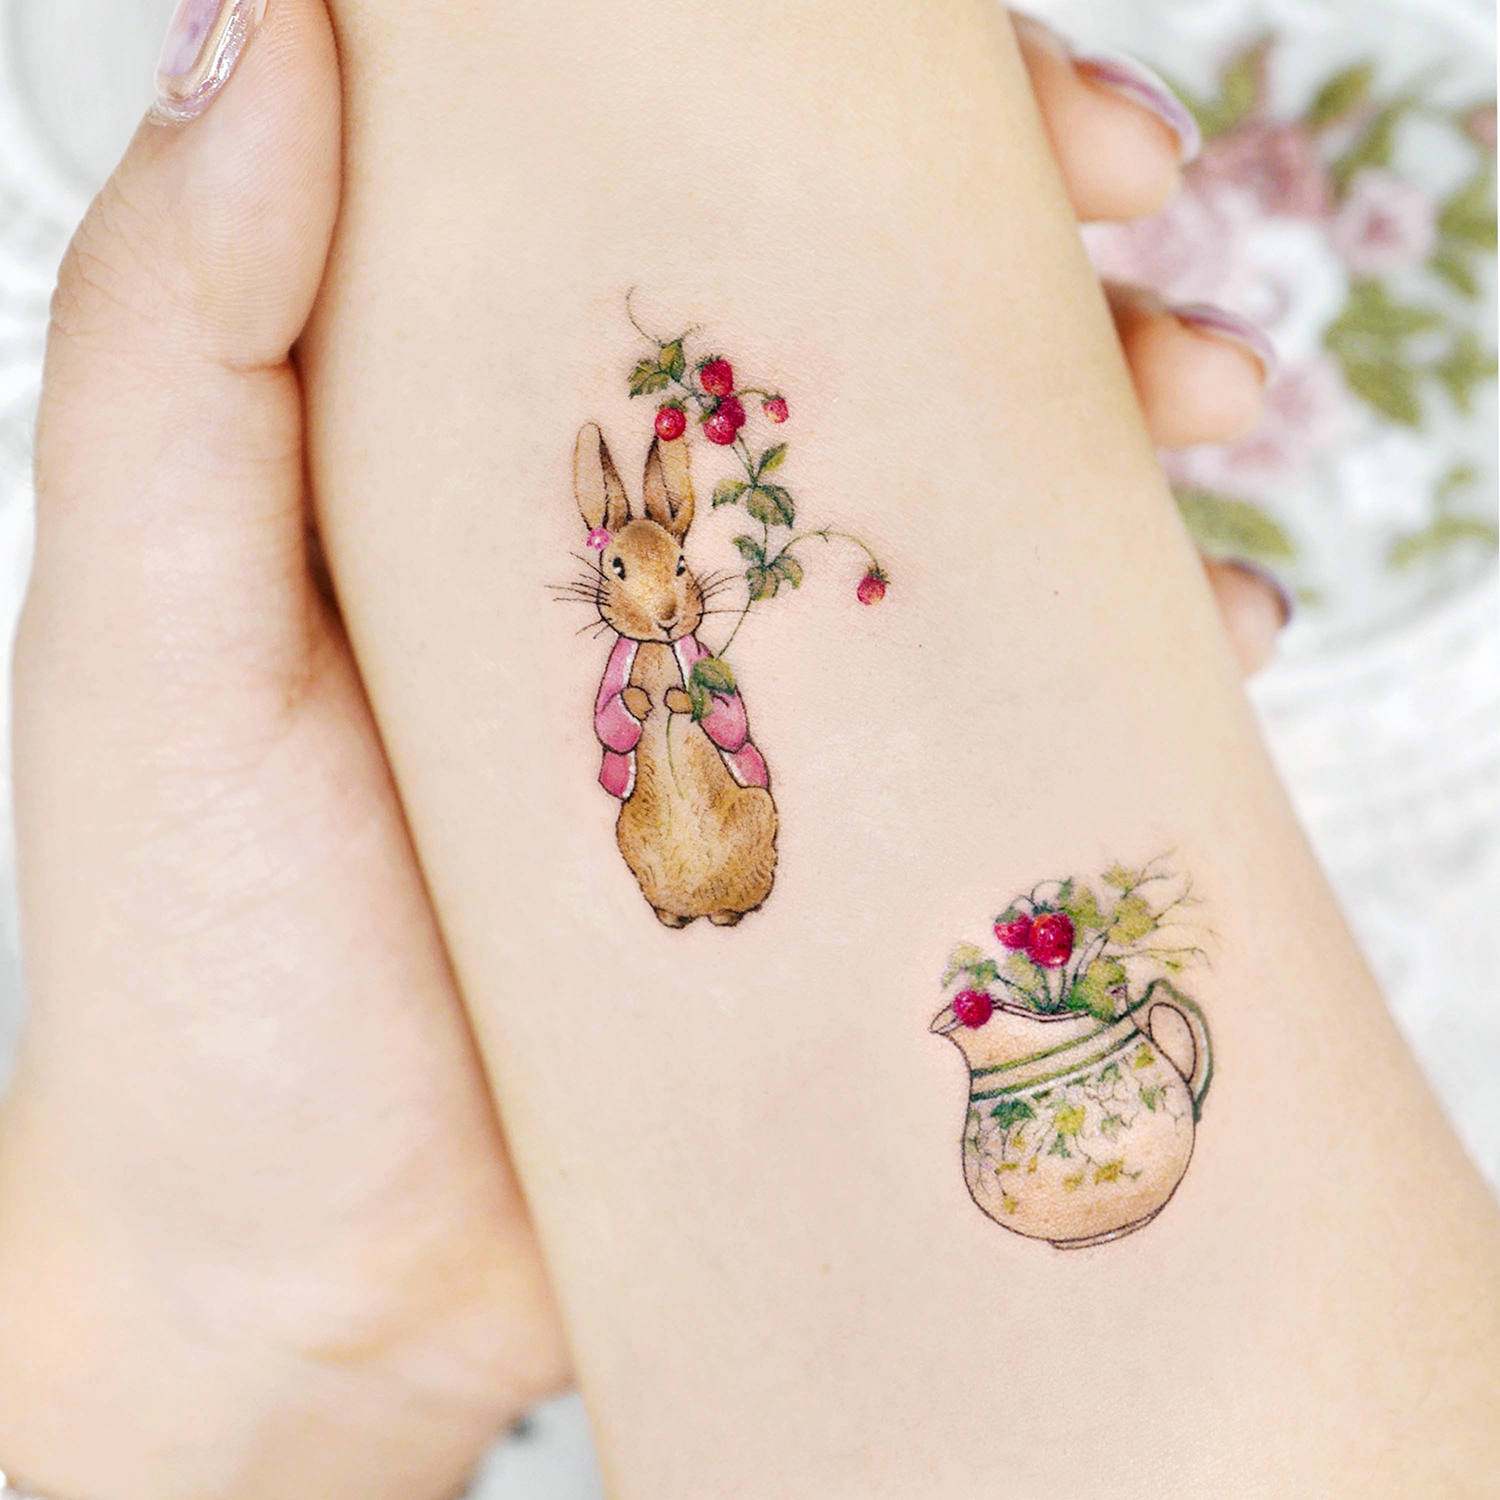 A tattoo based on the children's book, " The Tale of Peter Rabbit."